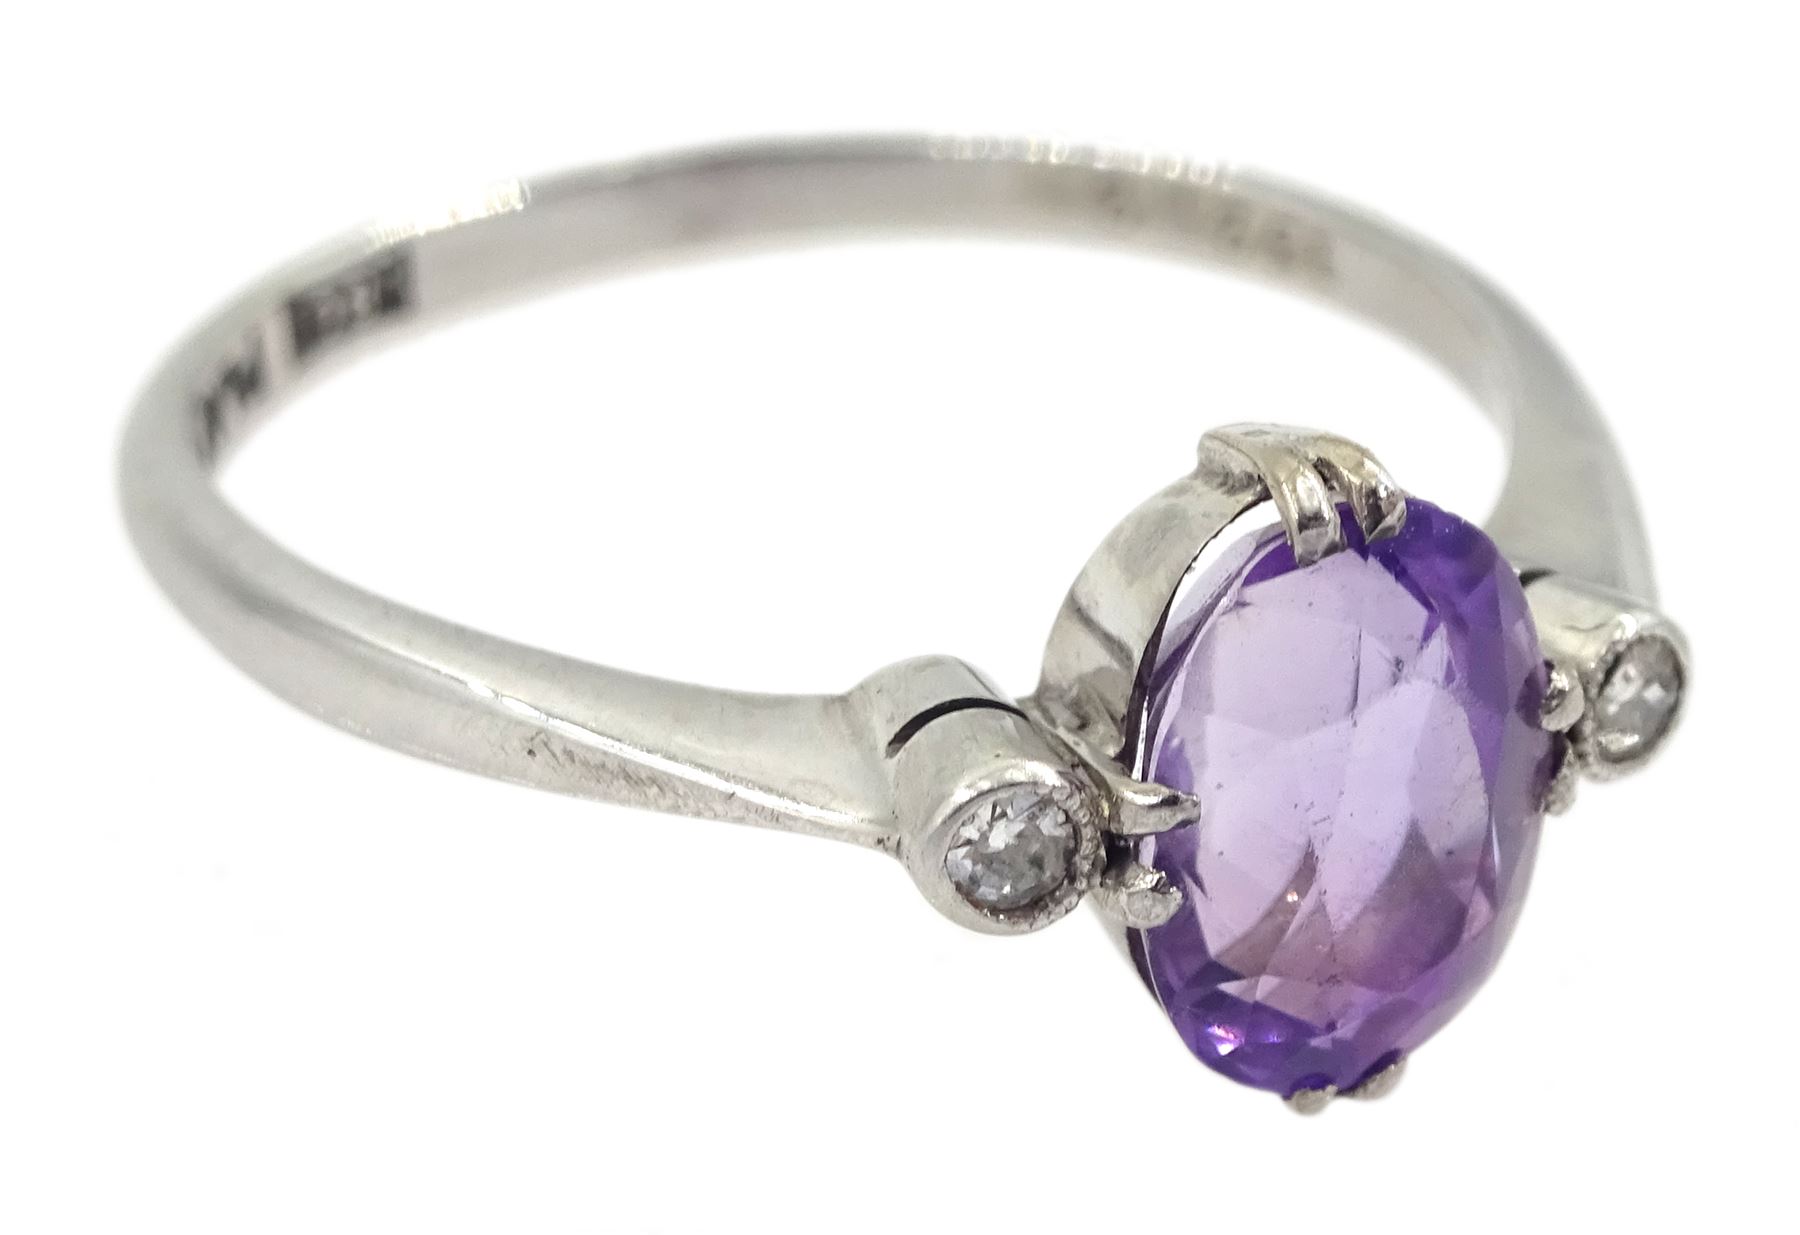 Early 20th century three stone oval amethyst and diamond chip ring - Image 3 of 4